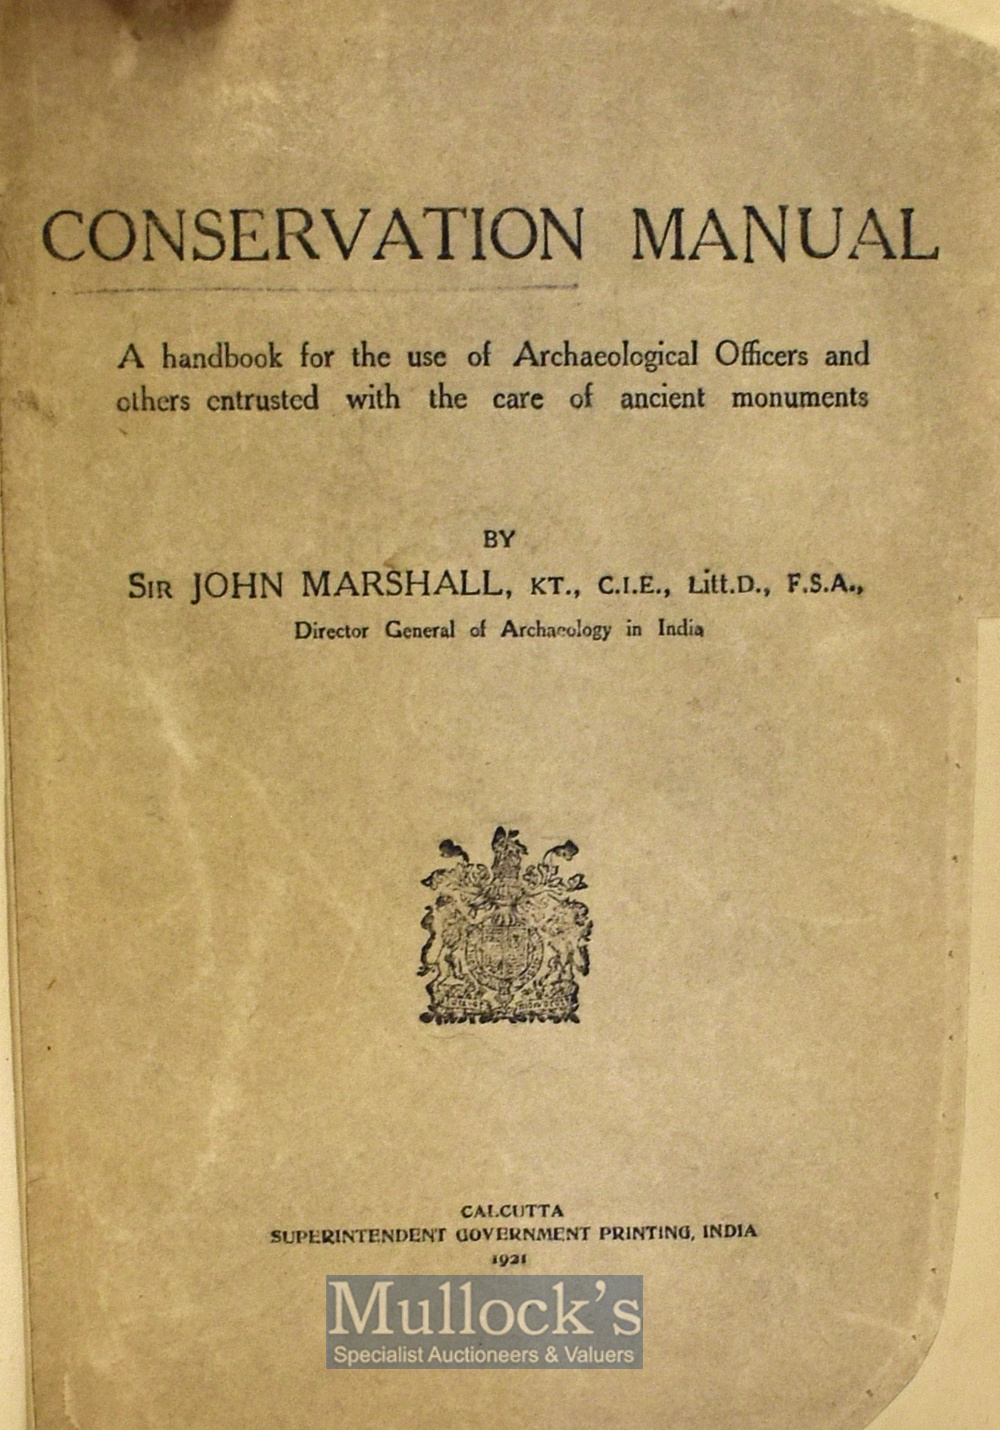 1921 Conservation Manual – A handbook for the use of archaeological officers and others entrusted - Image 2 of 2